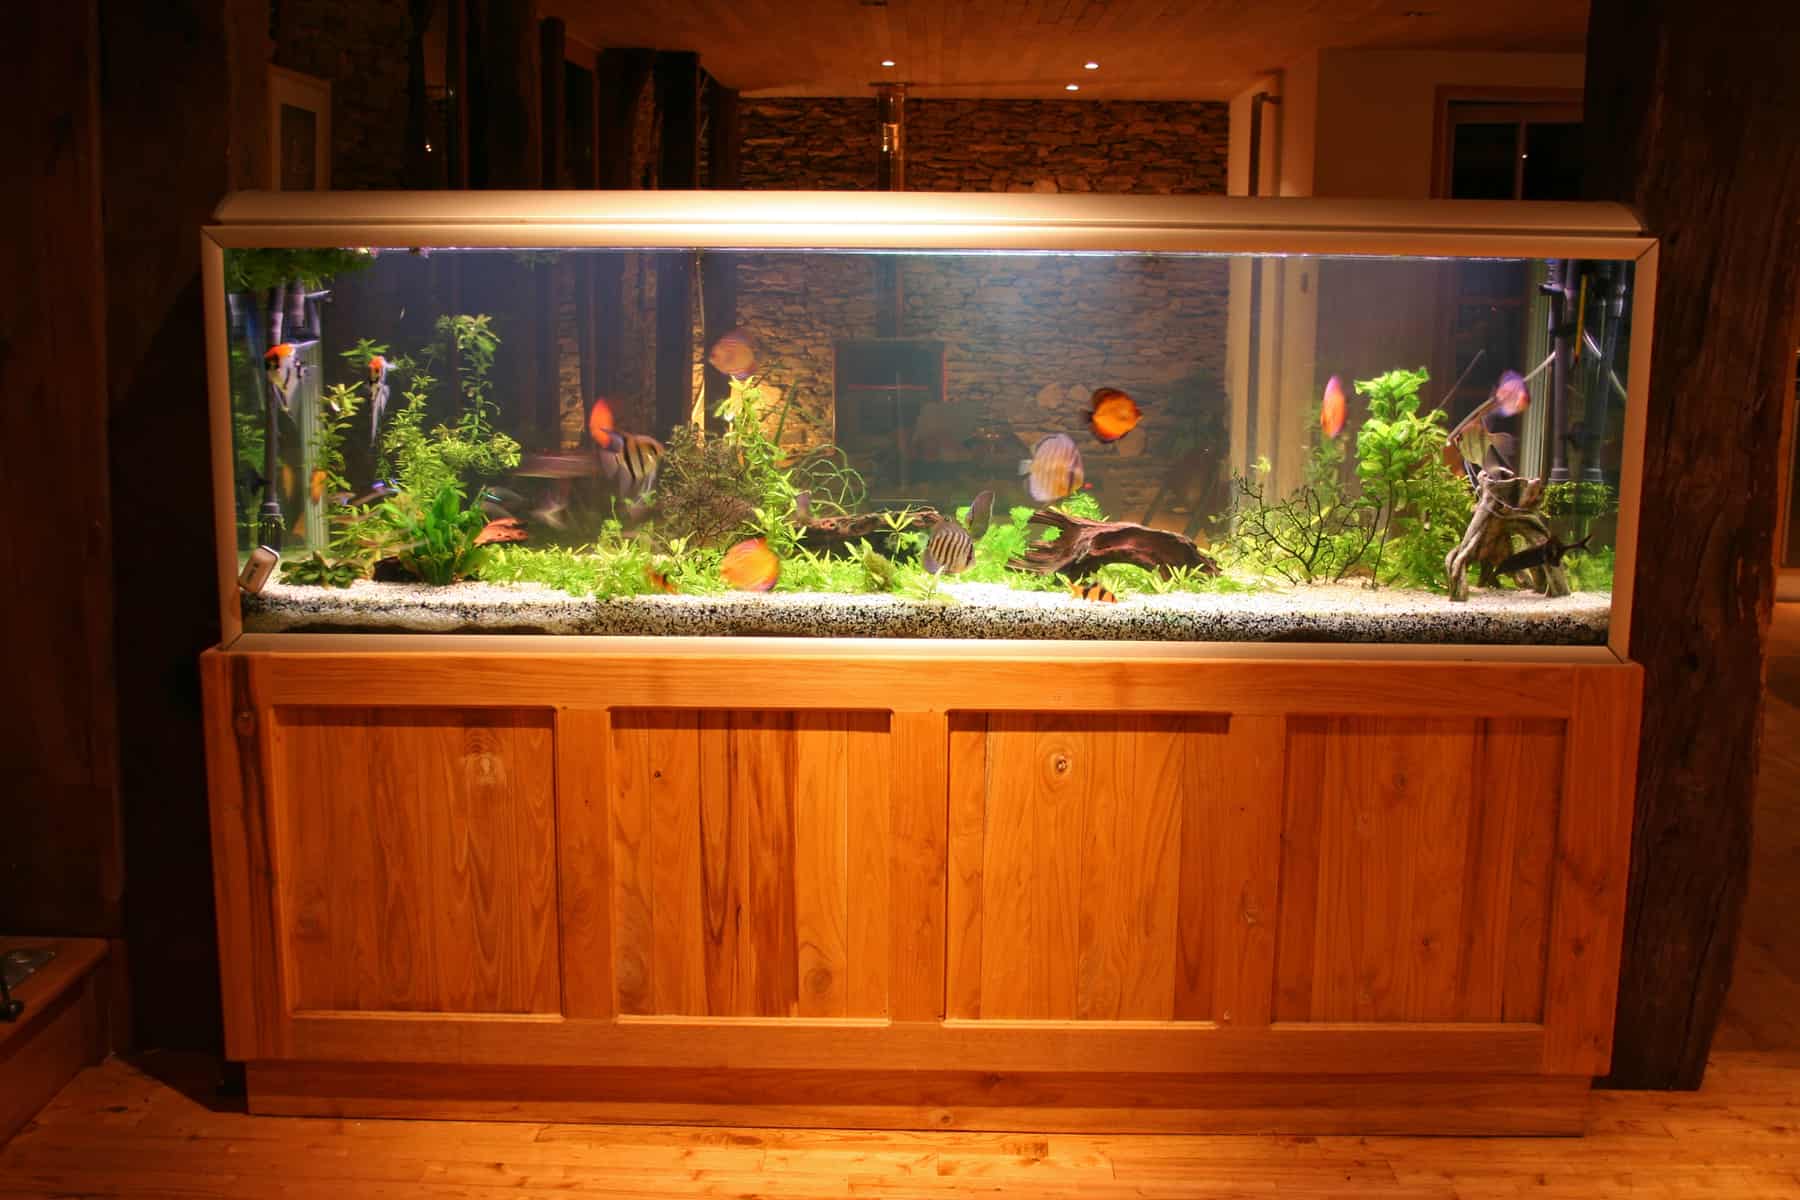 55-Gallon Fish Tank: Our Top Five Choices - Front View Of 55 Gallon Fish Tank During At Night